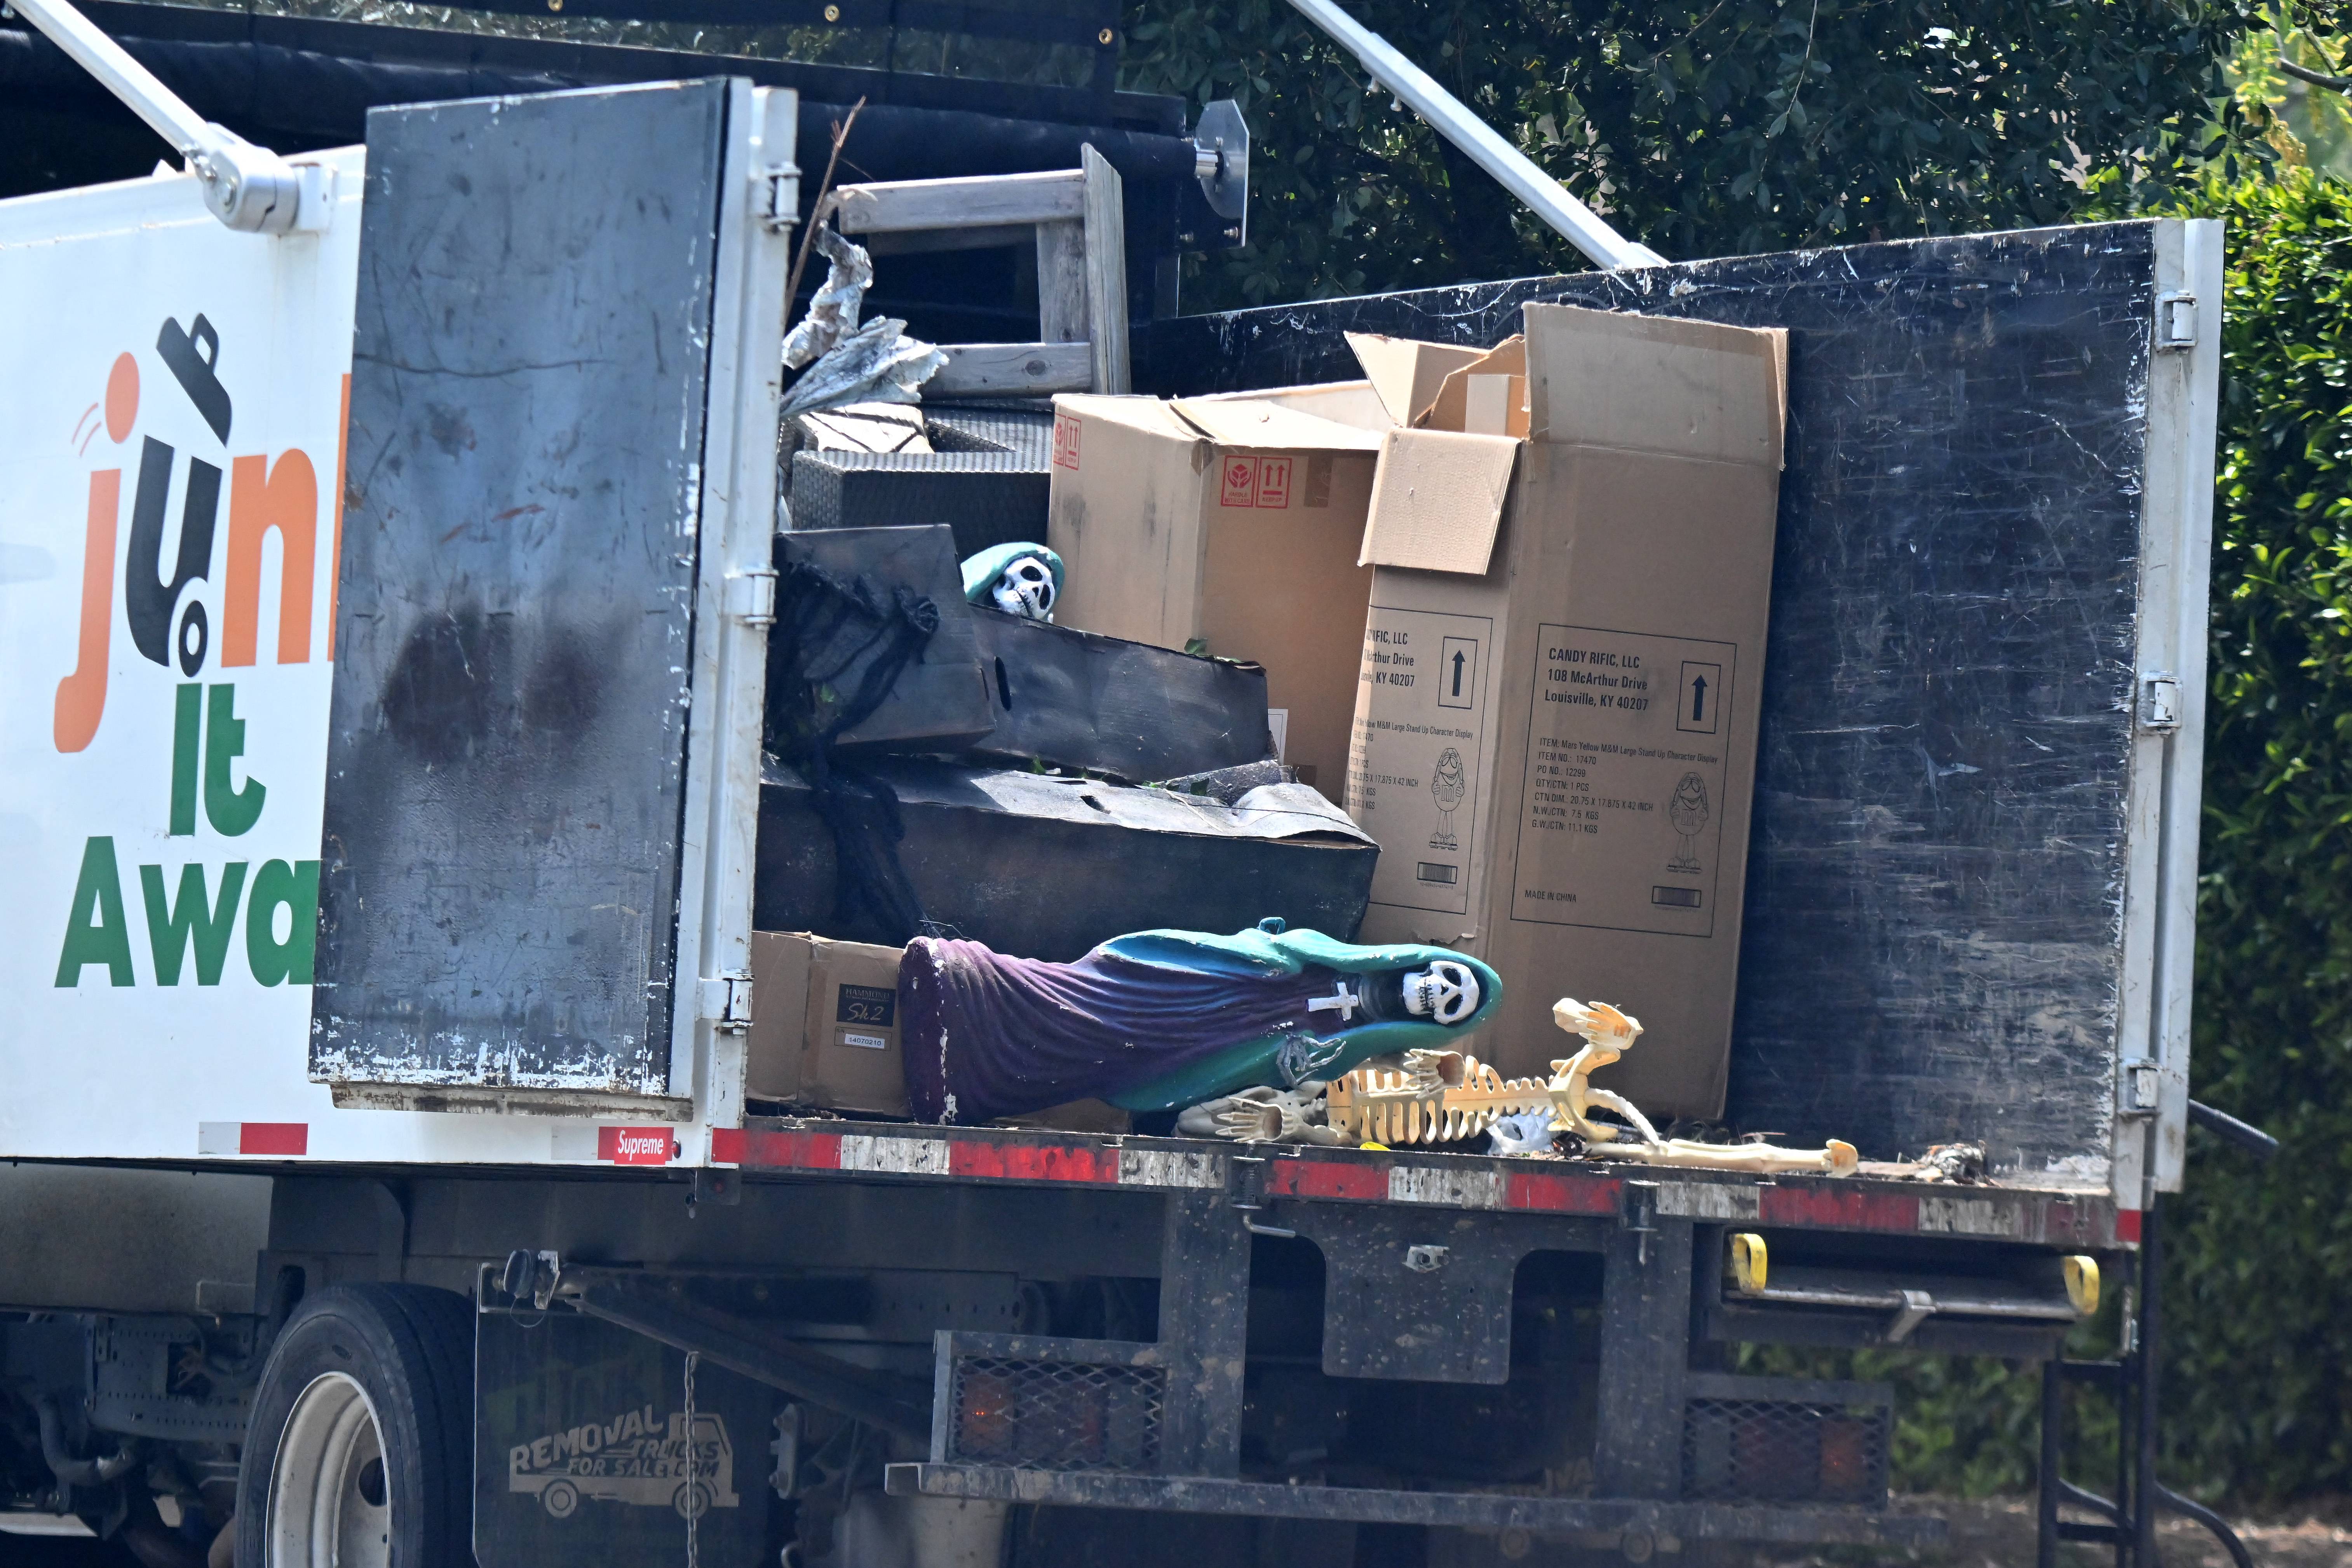 Some of the items that were seen being loaded onto the truck were Halloween decorations, an old mattress and outside furniture, among others things